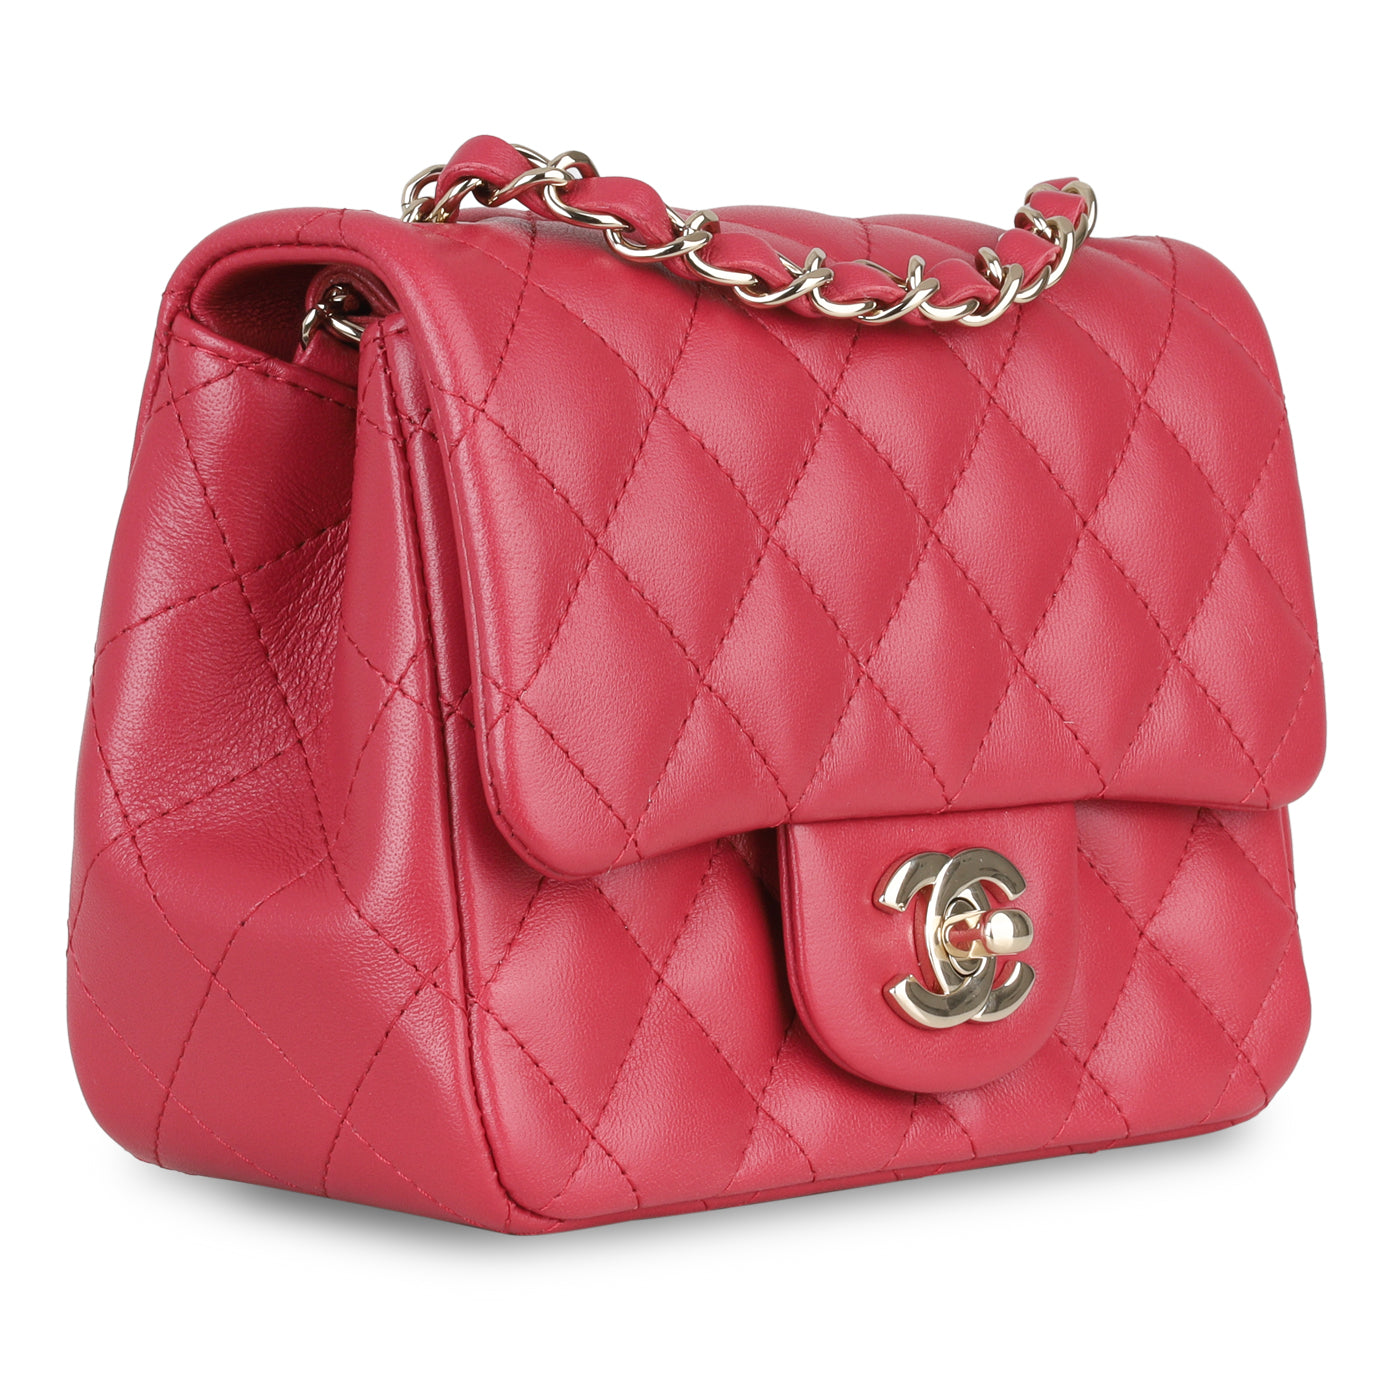 Chanel - Mini Square Classic Flap Bag - Raspberry Pink Caviar - CGHW -  Immaculate